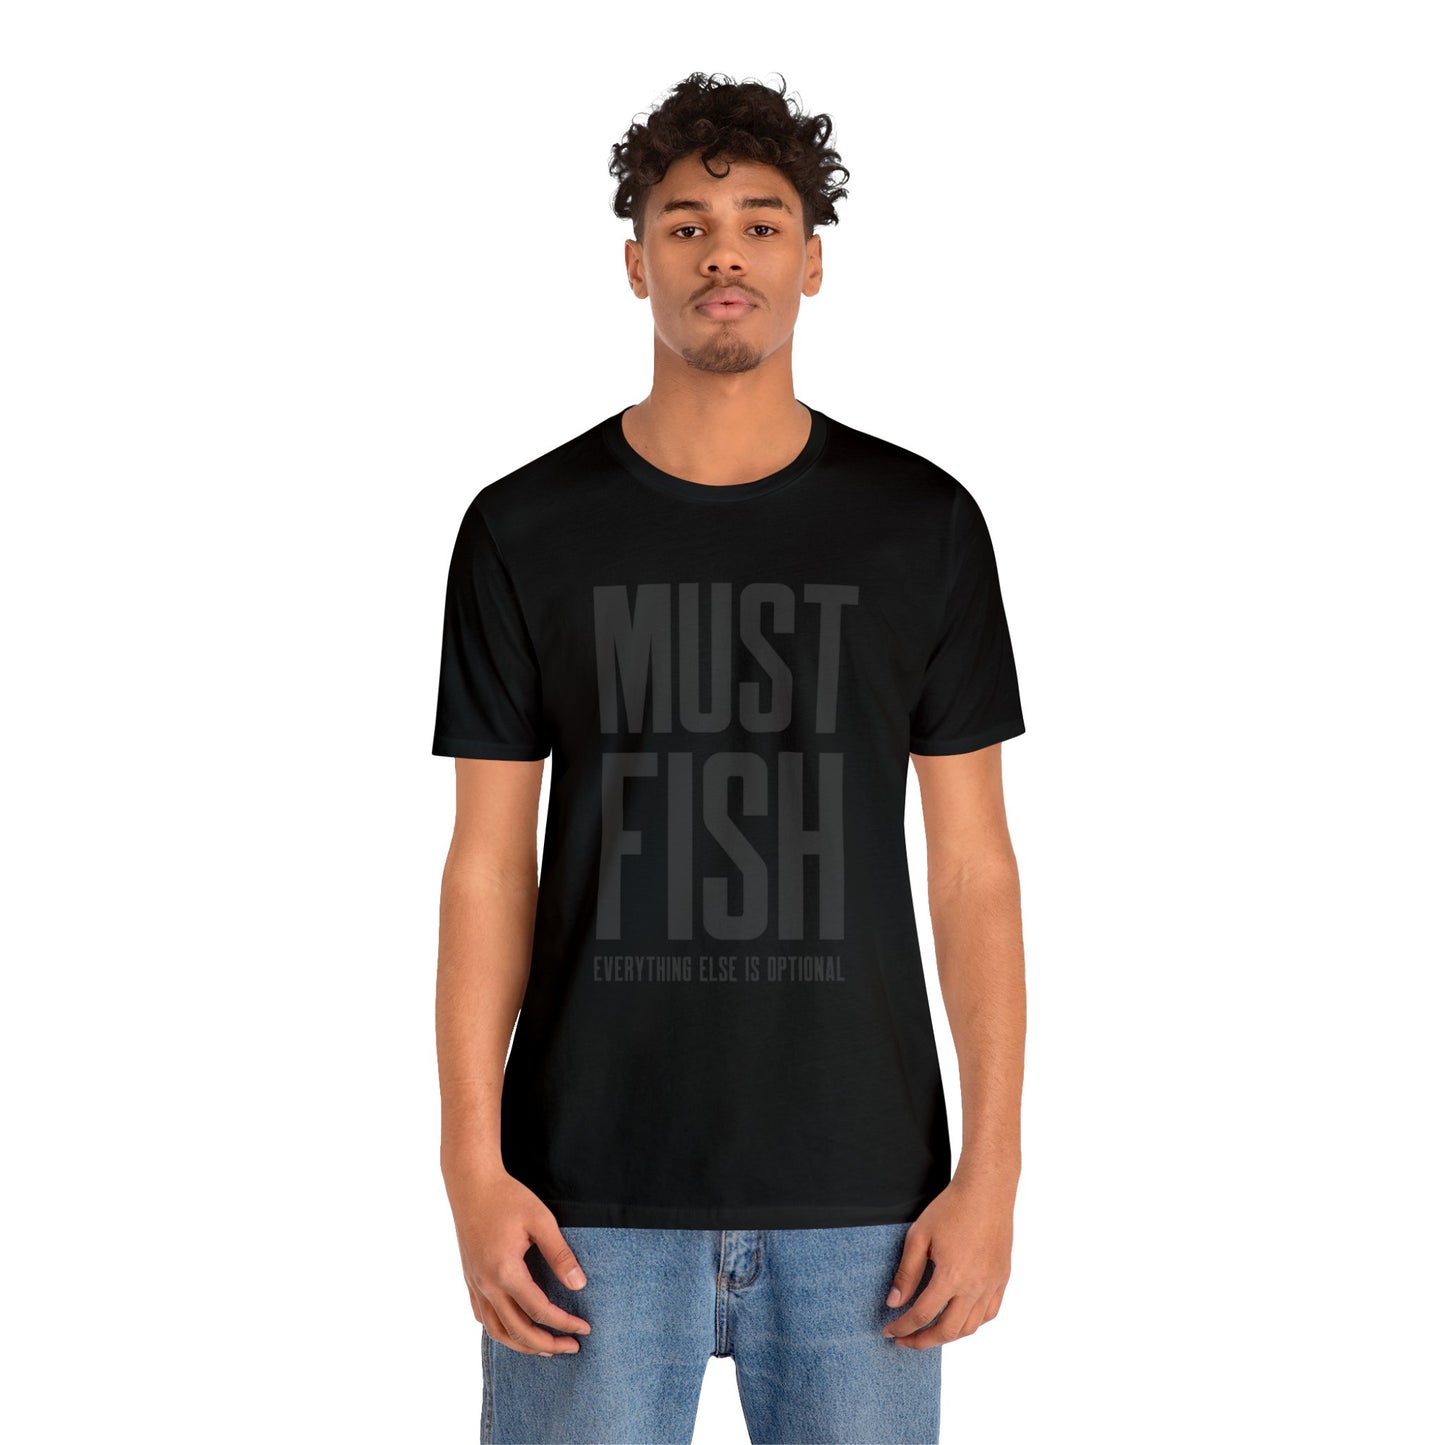 Must Fish (everything else is optional) T Shirt